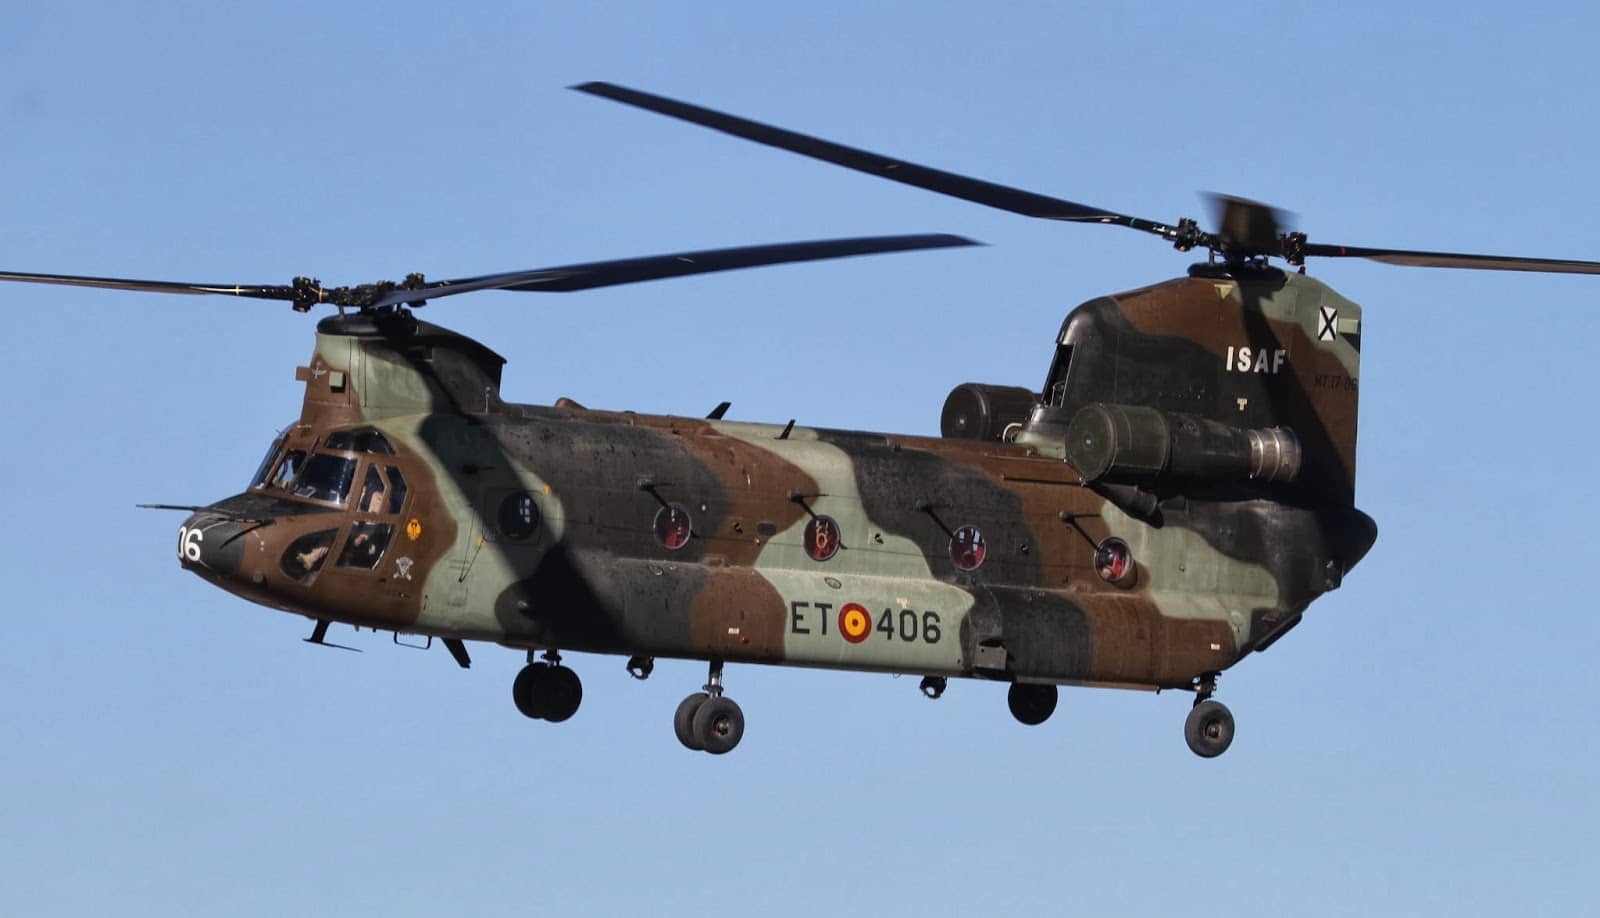 Indra has received a 35 million euros contract from the Spanish MoD to equip Army Chinook CH47F helicopters with next-gen EW systems